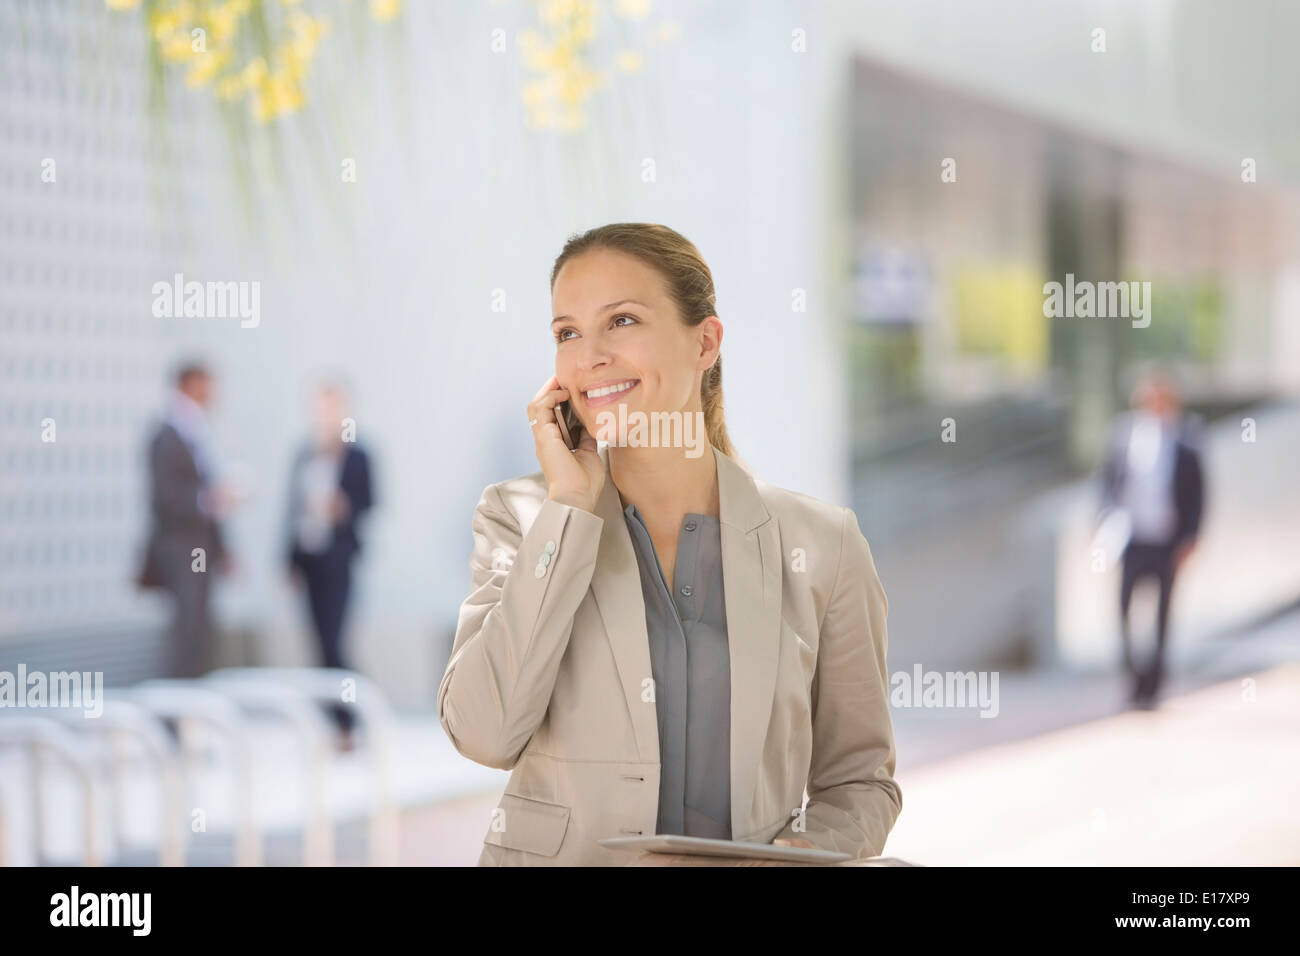 Businesswoman talking on cell phone Banque D'Images